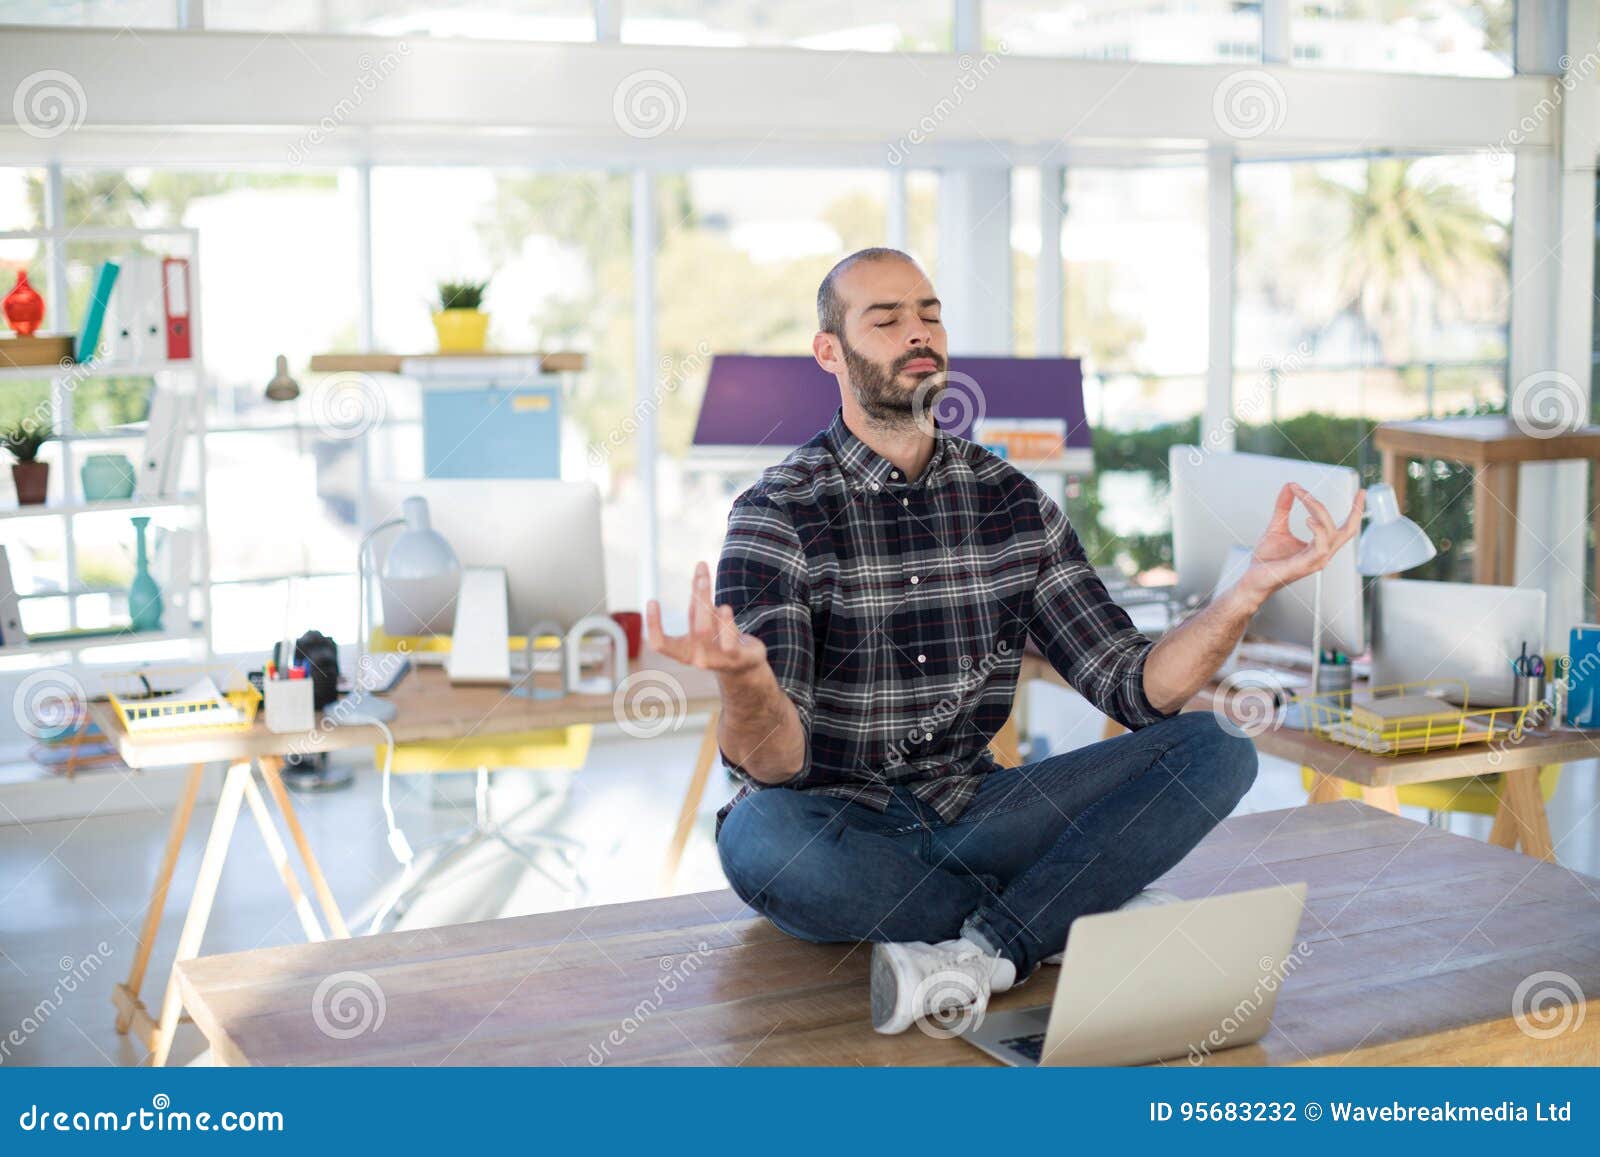 Male Executive Doing Yoga In Office Stock Photo Image Of